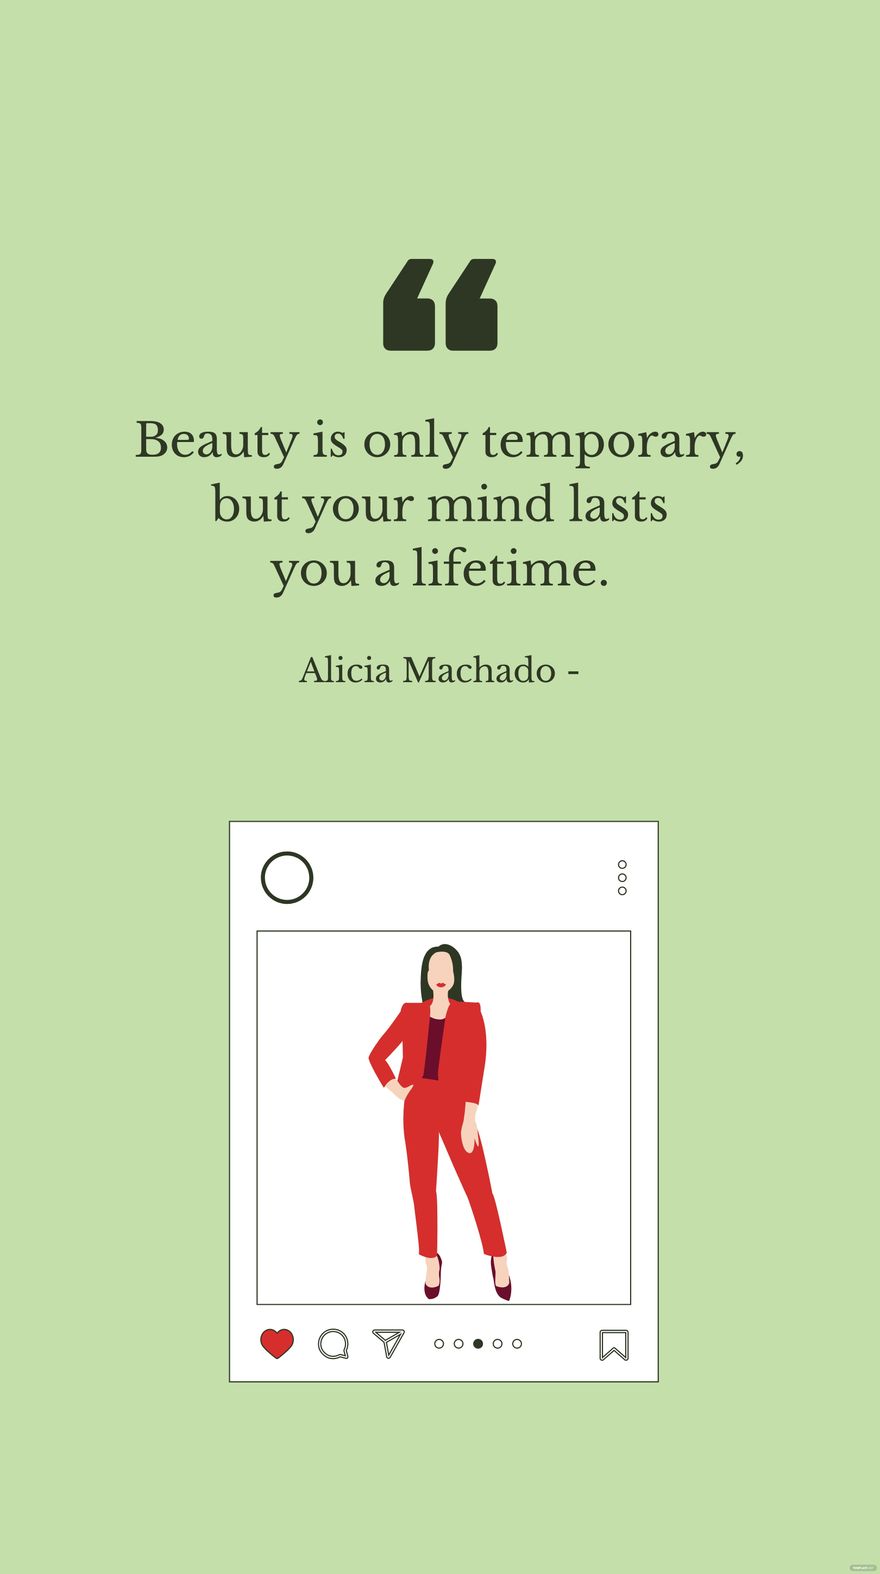 Free Alicia Machado - Beauty is only temporary, but your mind lasts you a lifetime.